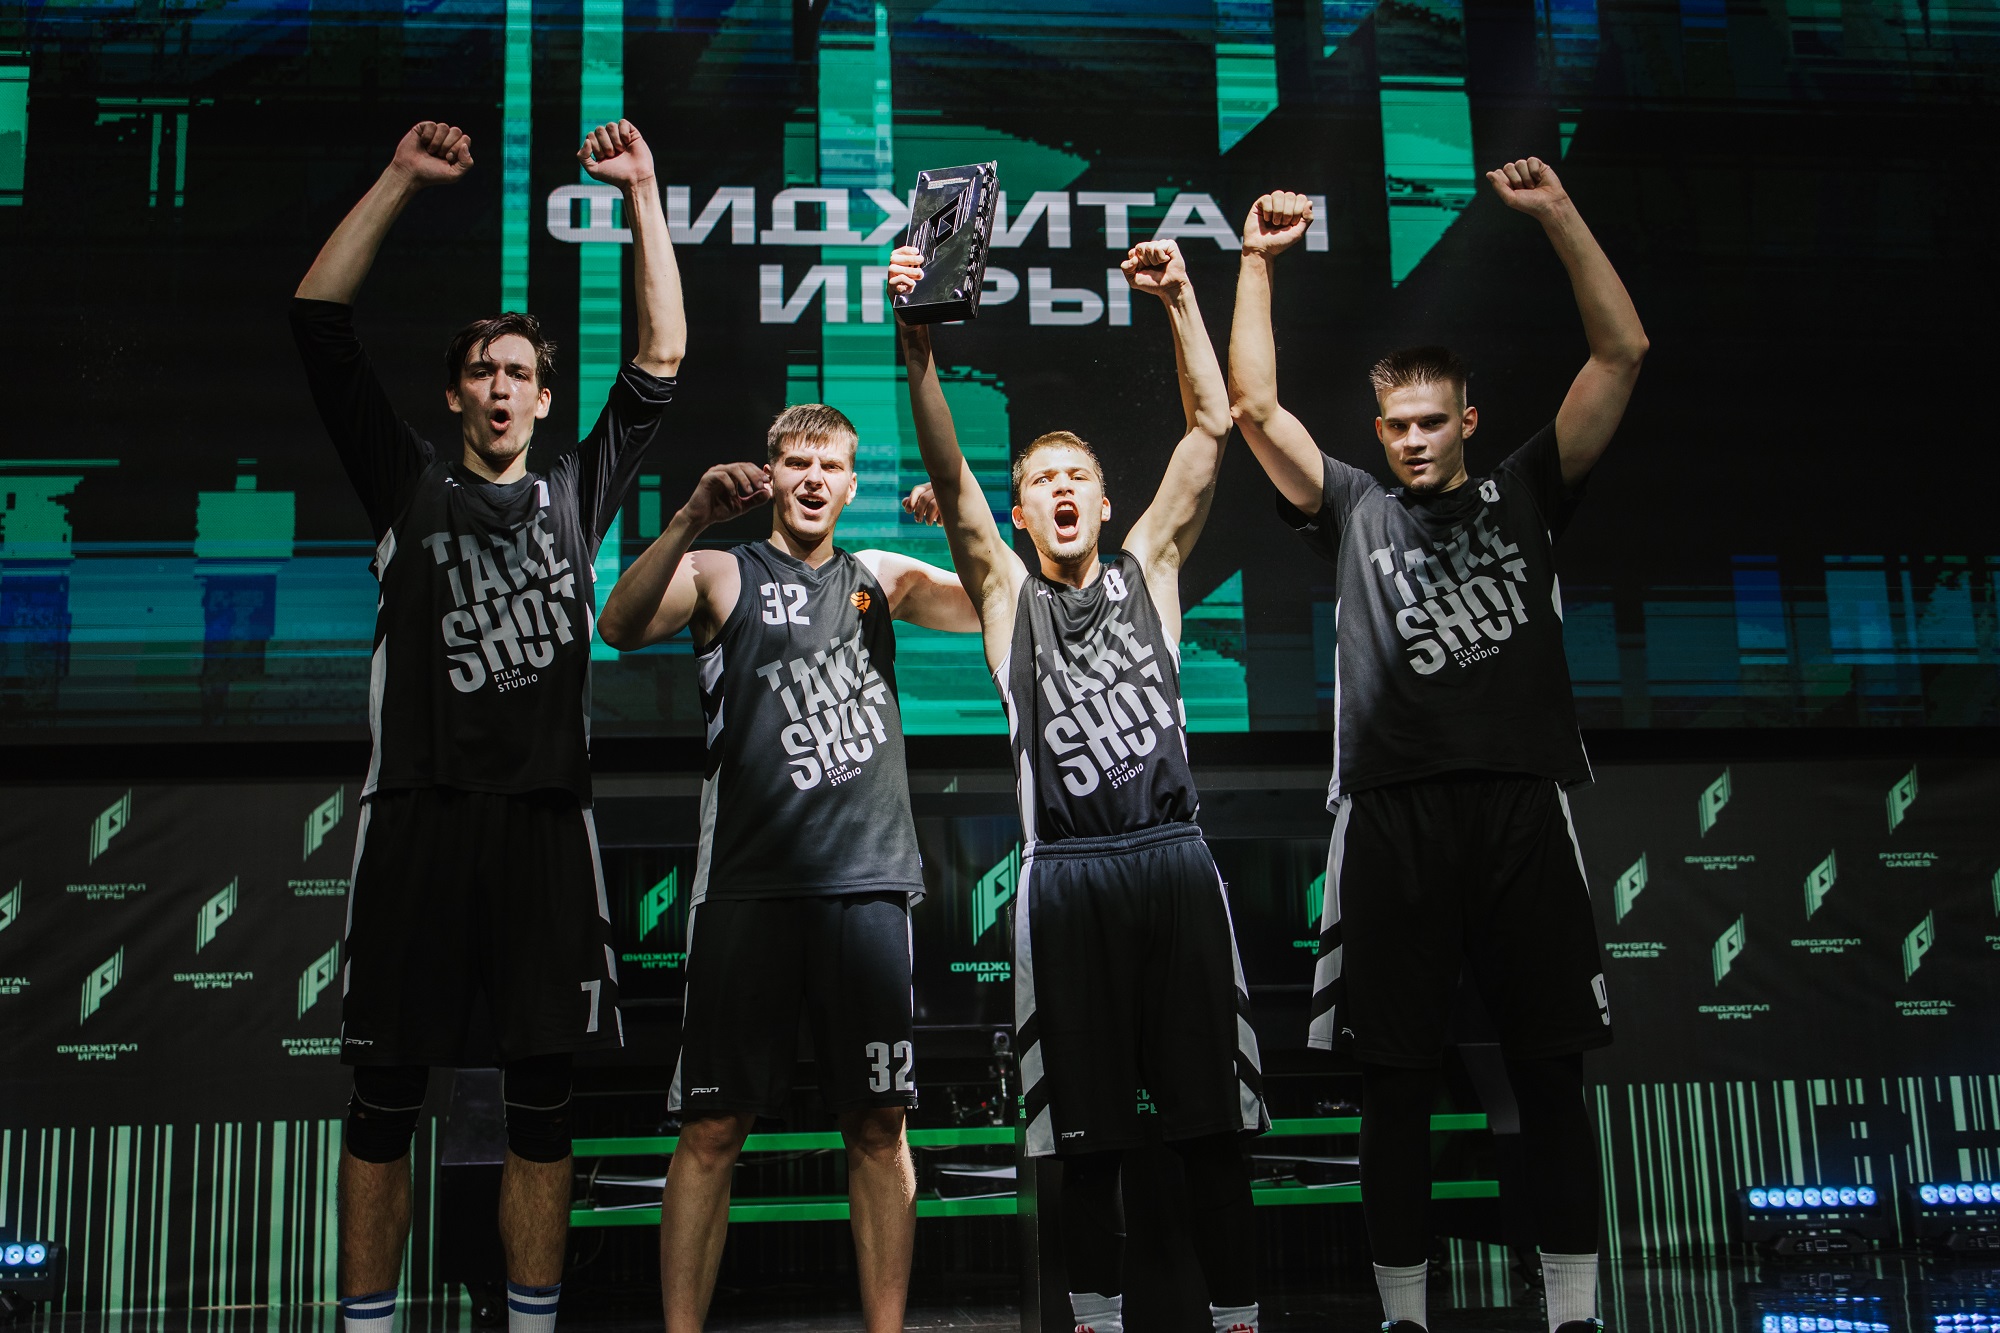 Take Shot basketball players – first winners of the Phygital Games in Kazan